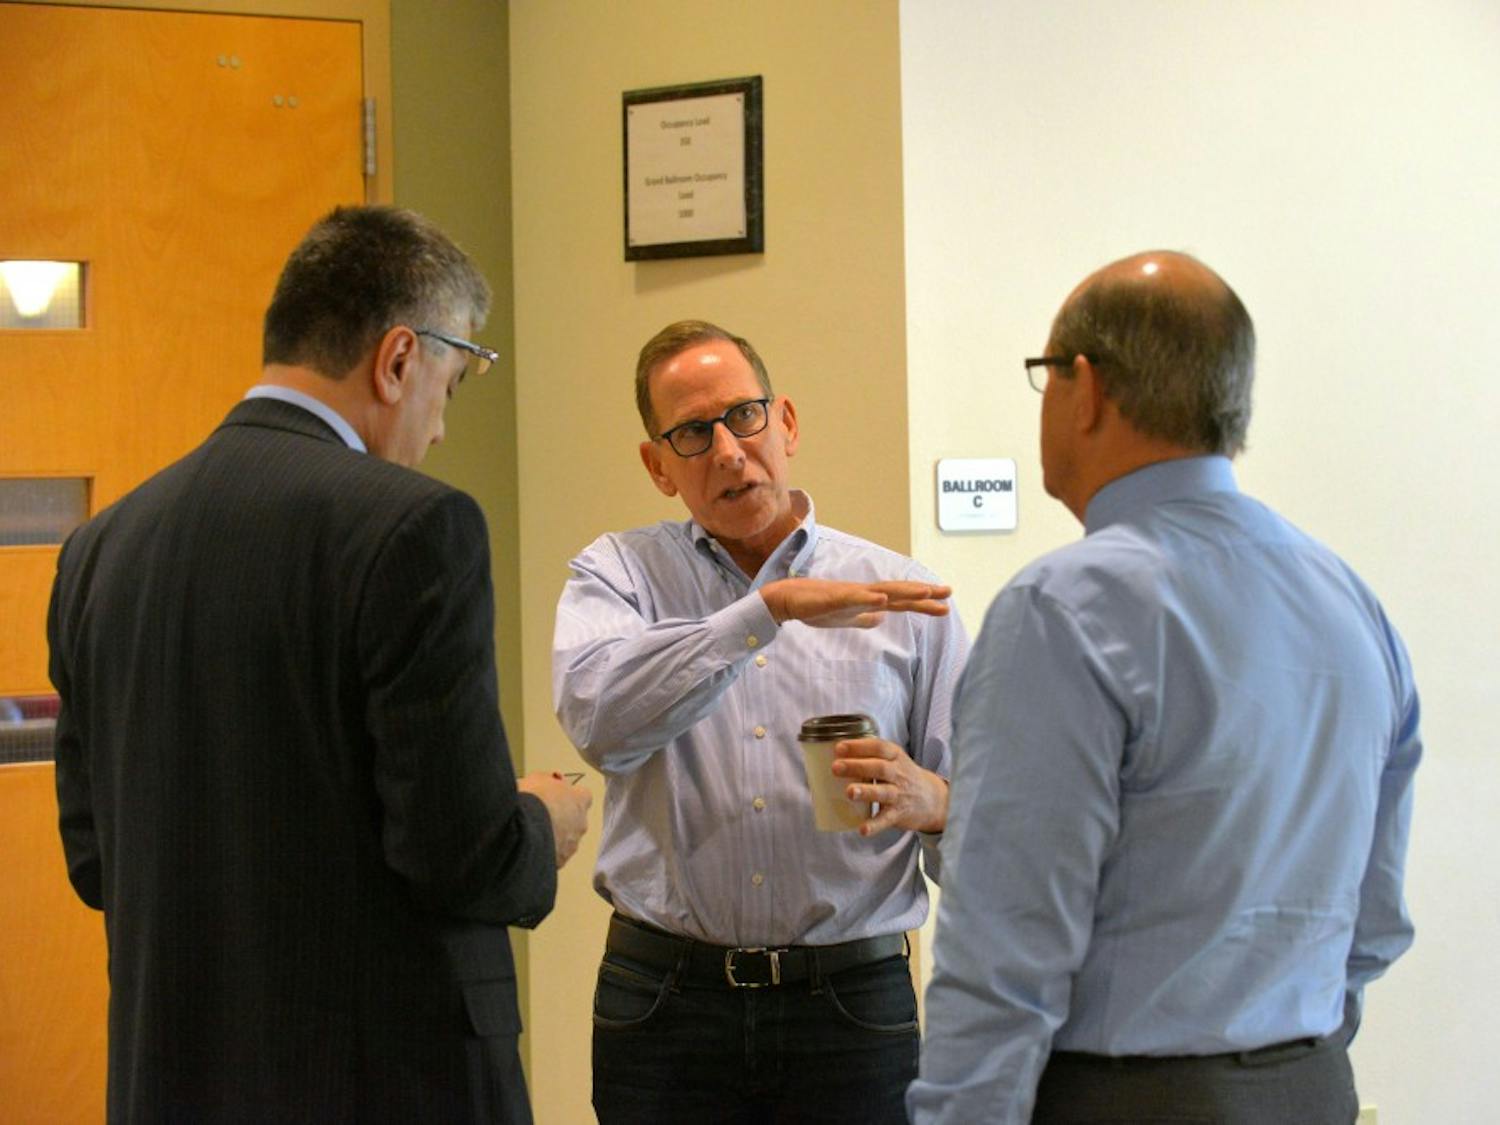 Greg Horowitt (center), a co-founder of T2 Venture Creation, talks with provost Chaouki Abdallah and UNM's President Robert Frank outside the SUB. The Rainforest 2: UNM Economic Development Summit was held at the SUB ballroom Monday Oct. 26, 2015.&nbsp;